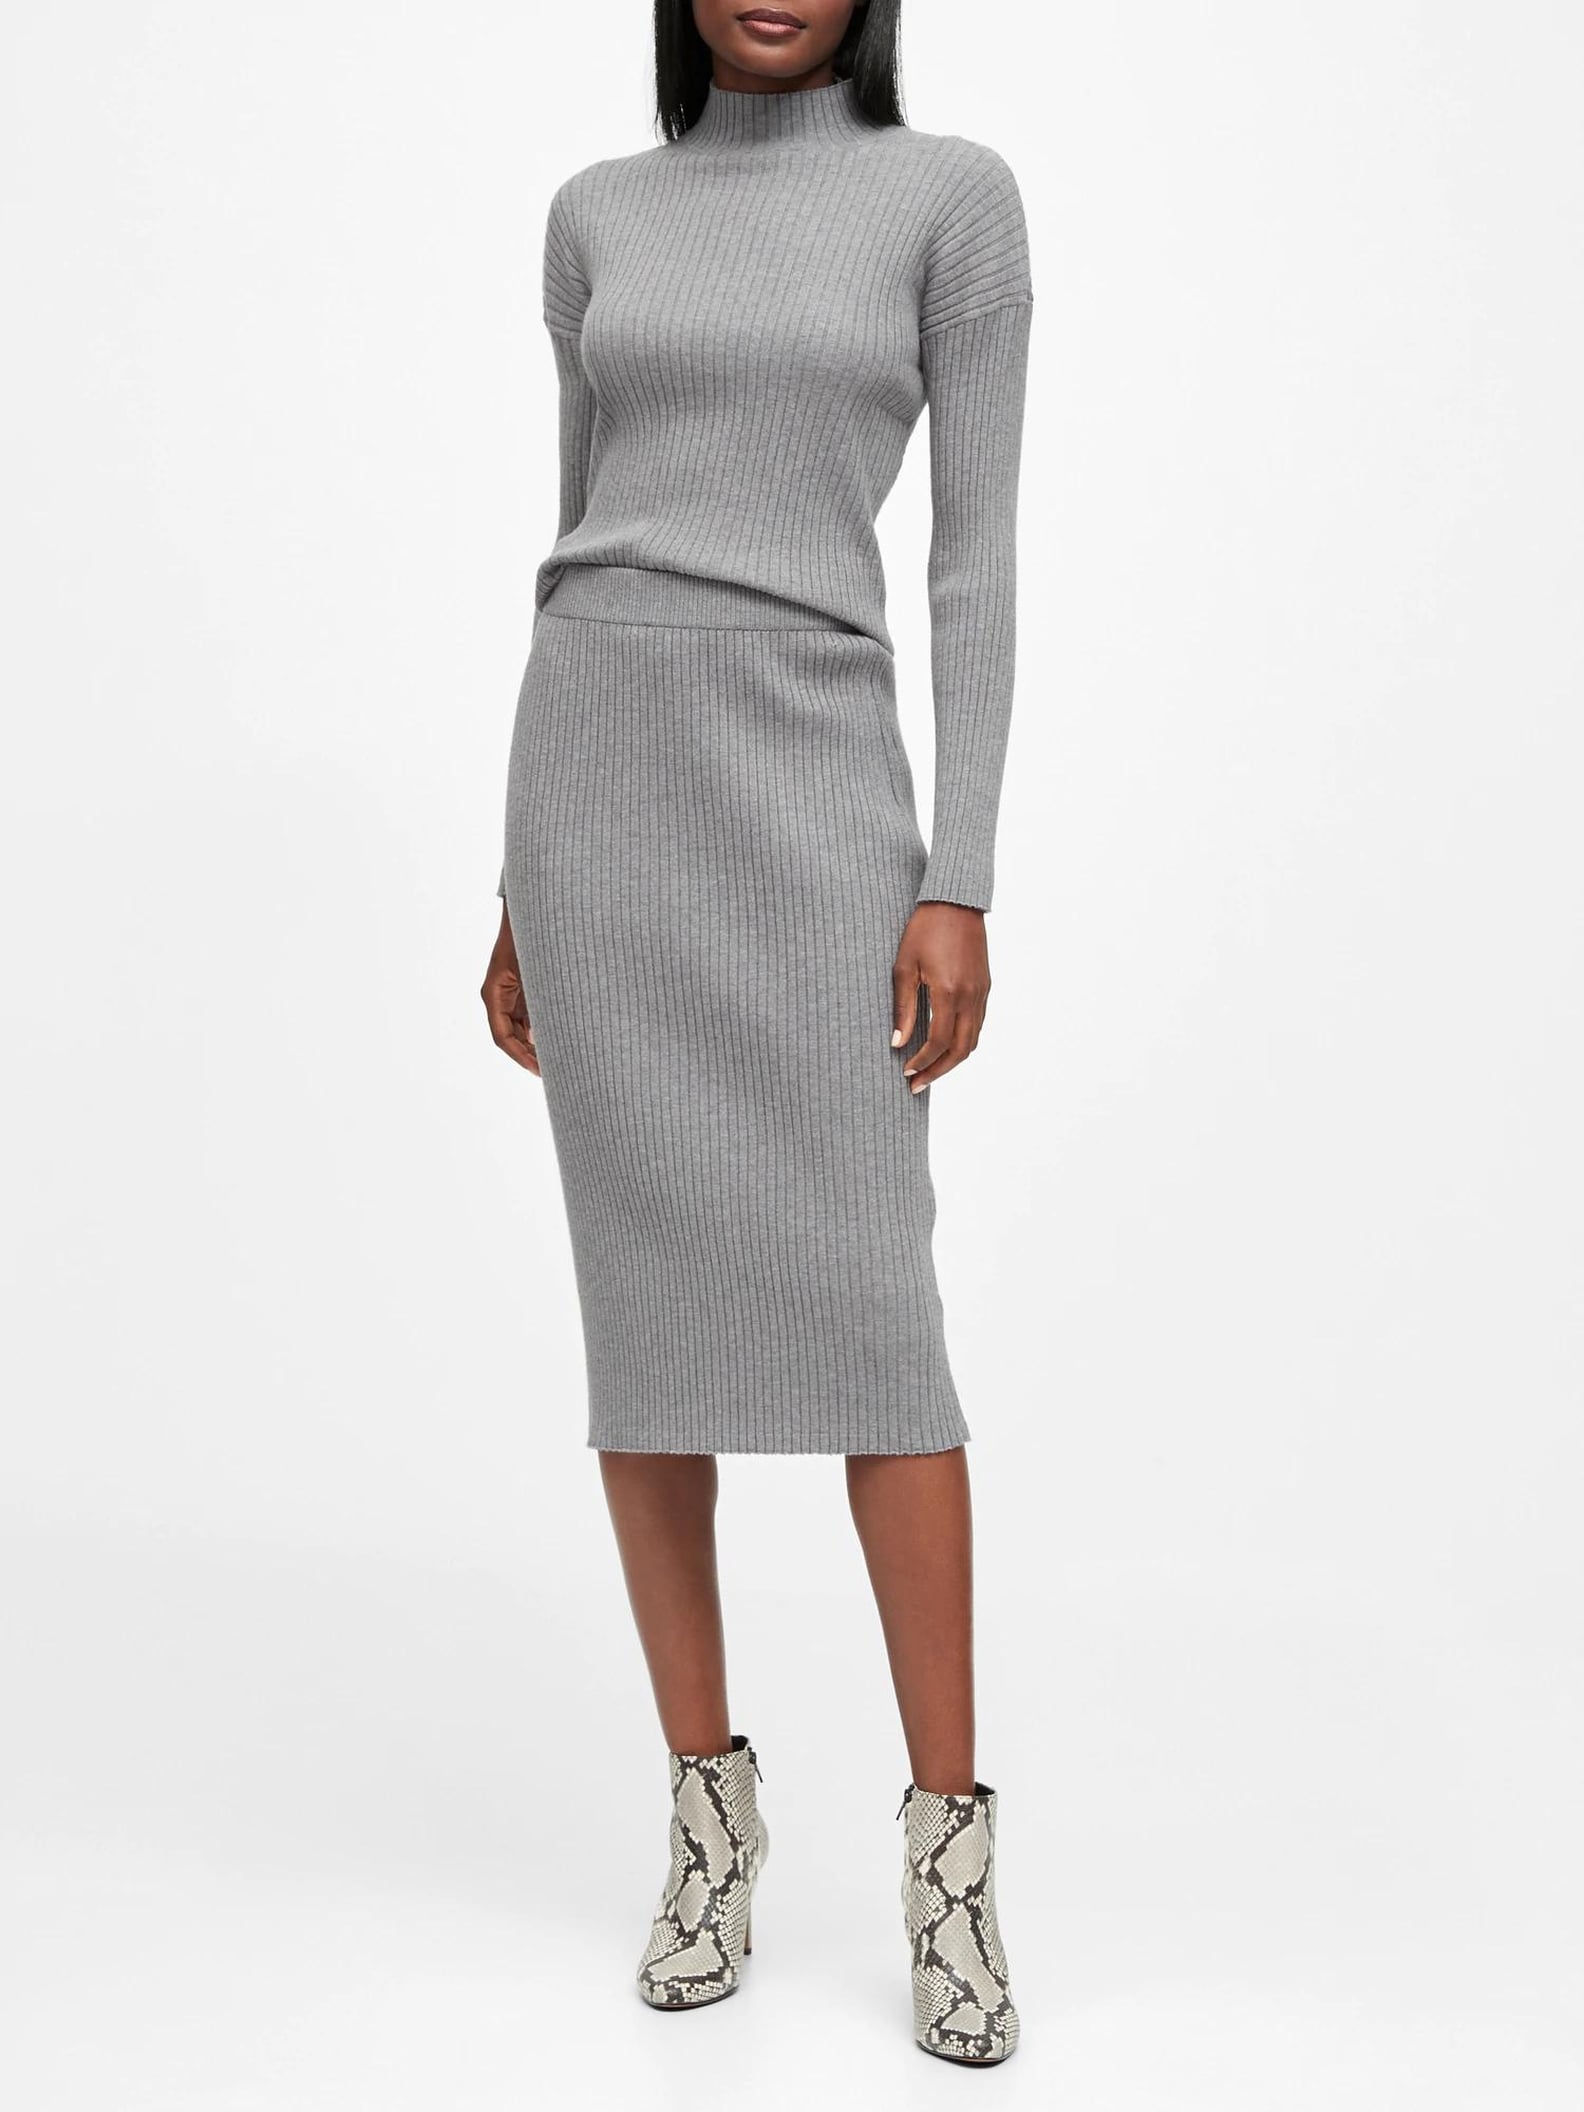 Best Two Piece Sets From Banana Republic | POPSUGAR Fashion